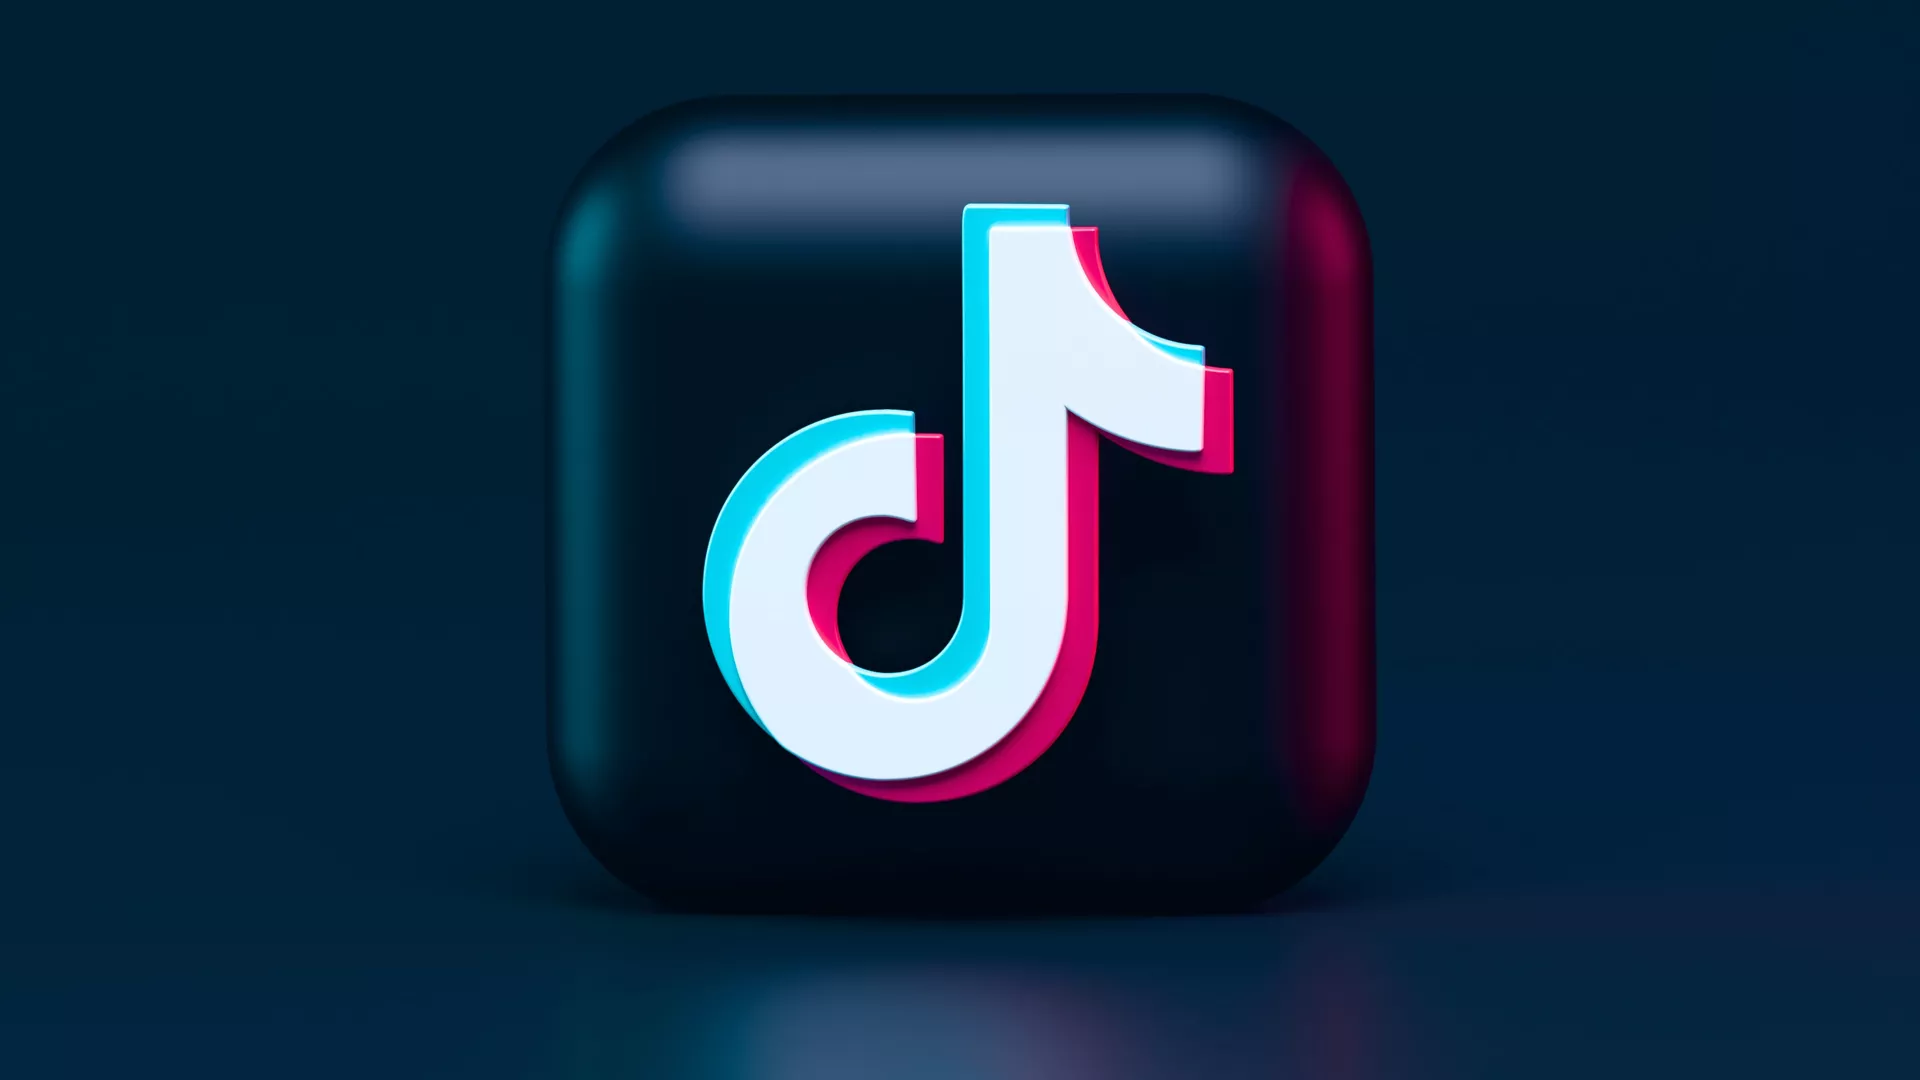 Where Does TikTok’s US Ban Stand In 2021 After Failed Oracle Cloud Deal